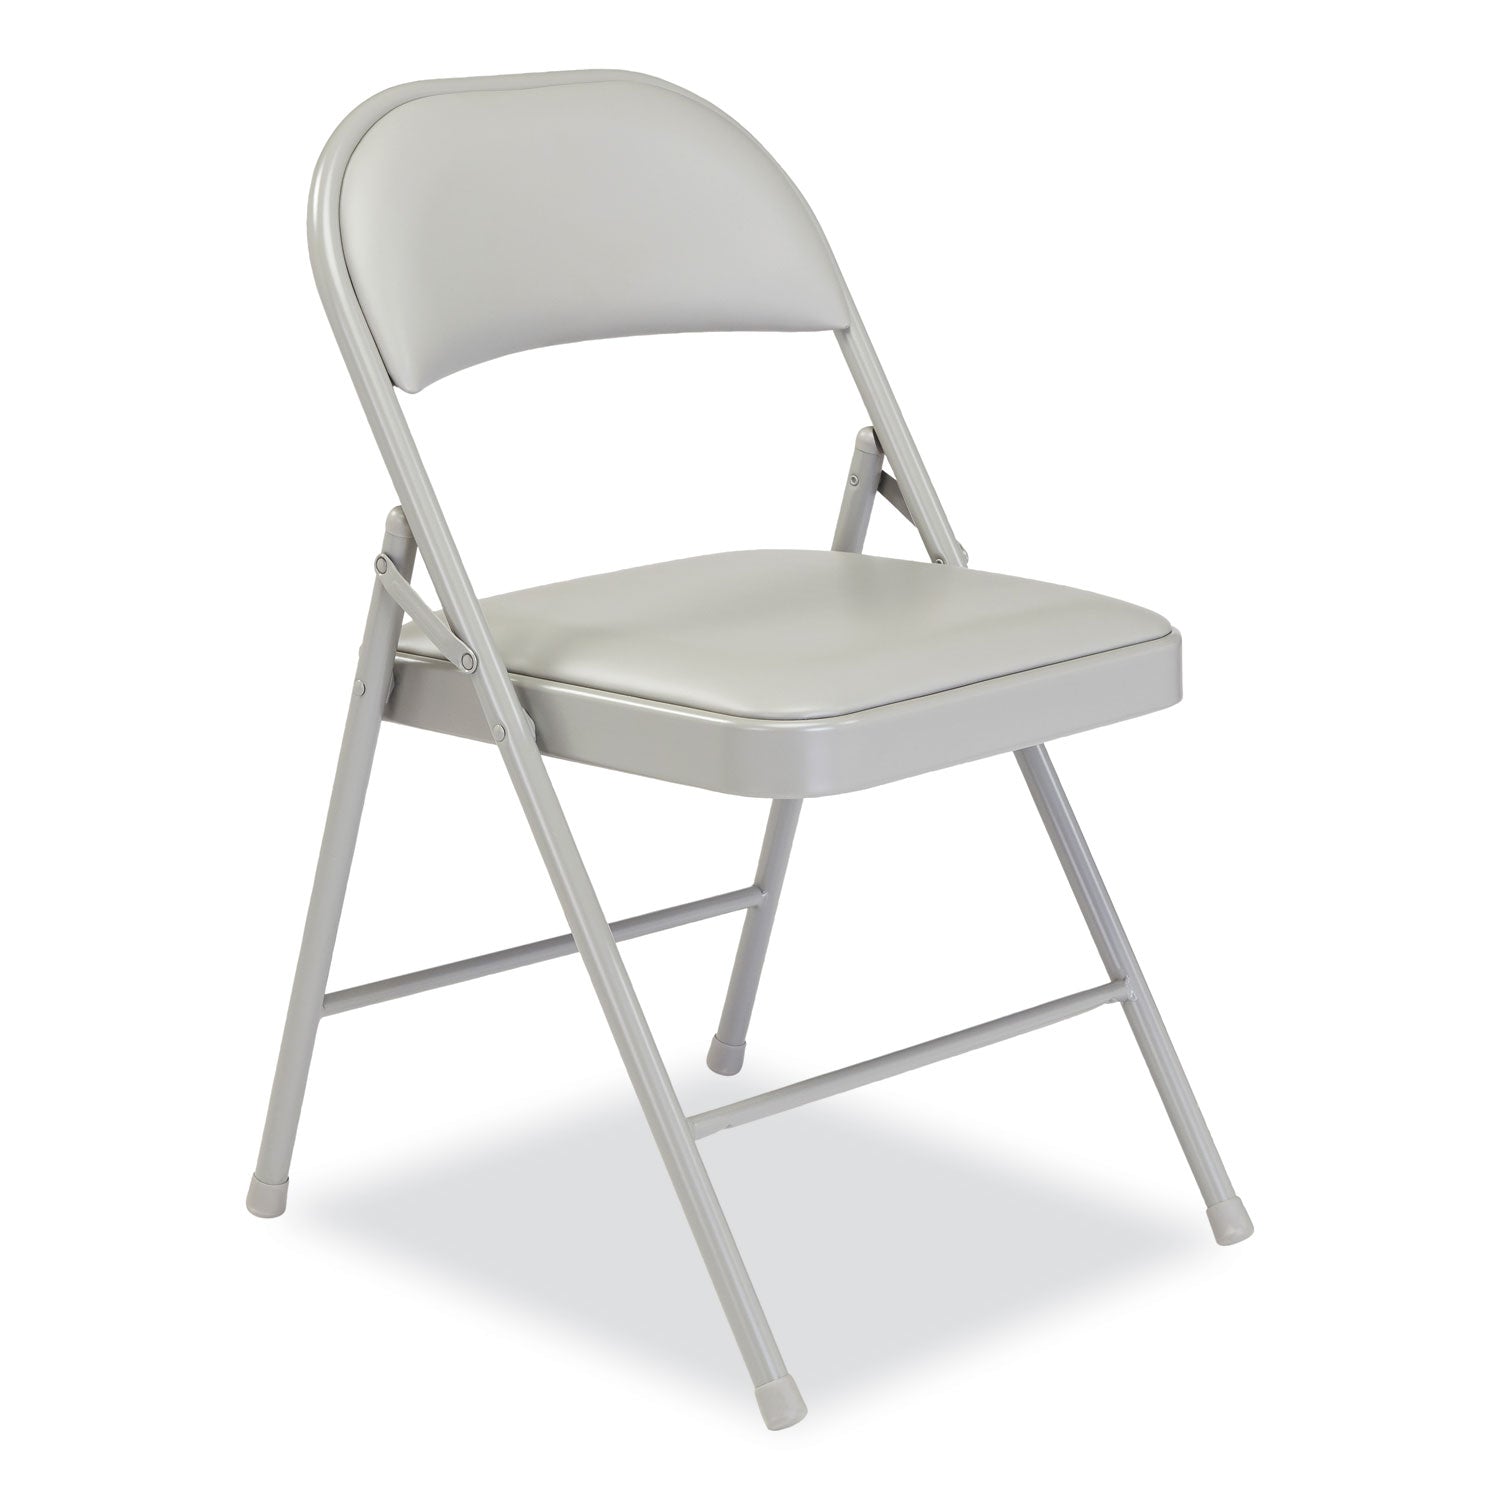 950-series-vinyl-padded-steel-folding-chair-supports-up-to-250-lb-1775-seat-height-gray-4-carton-ships-in-1-3-bus-days_nps952 - 2